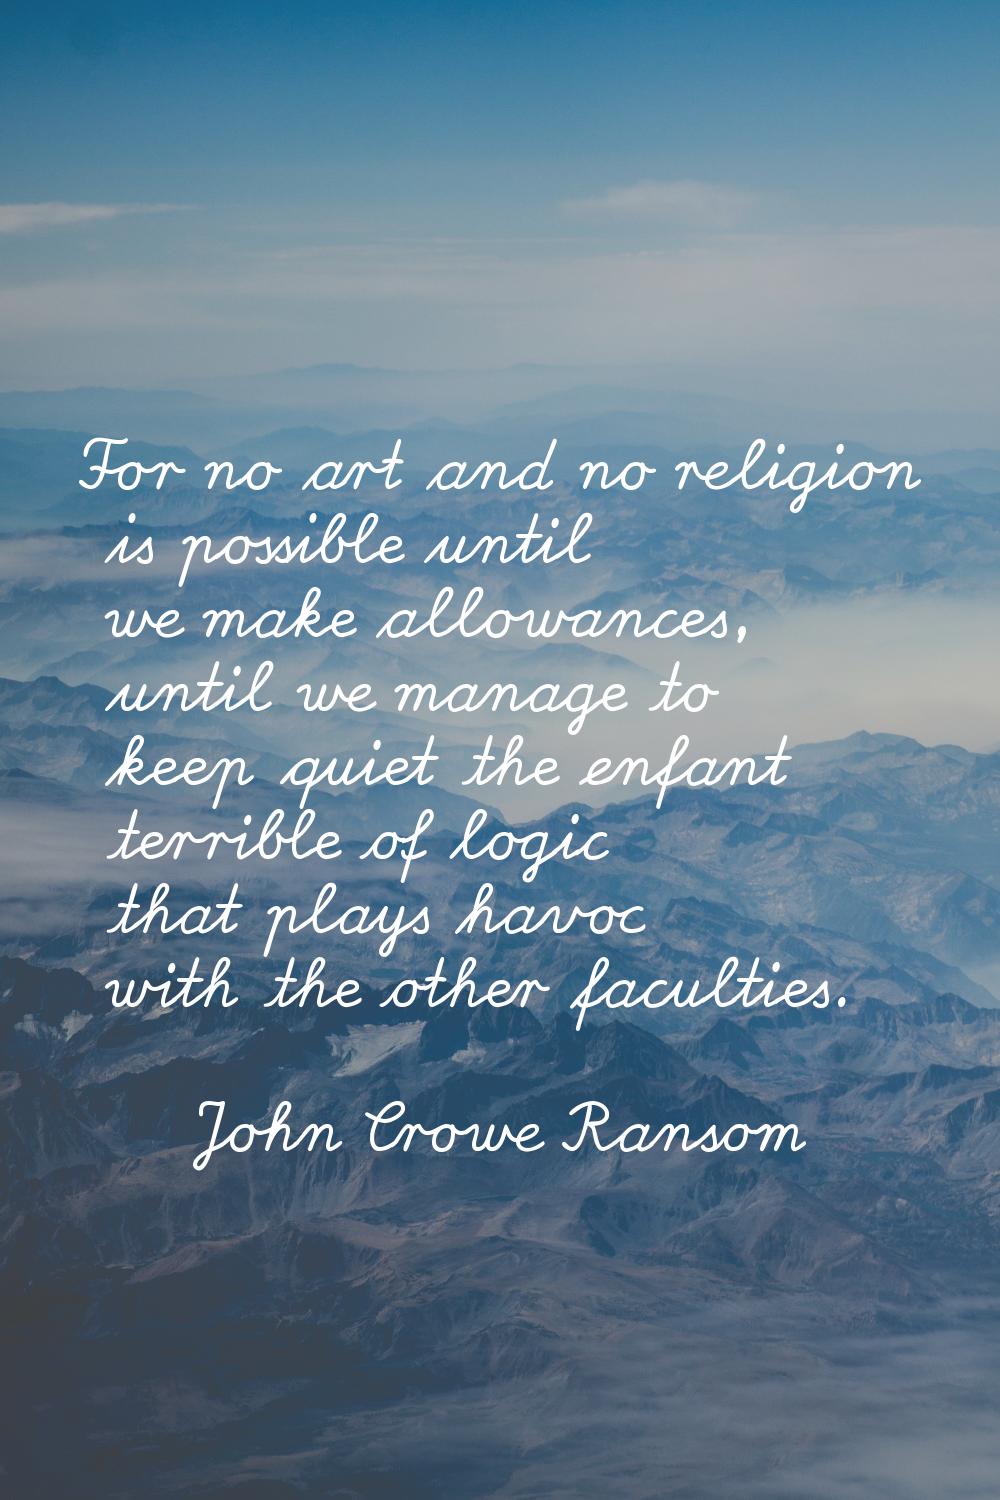 For no art and no religion is possible until we make allowances, until we manage to keep quiet the 